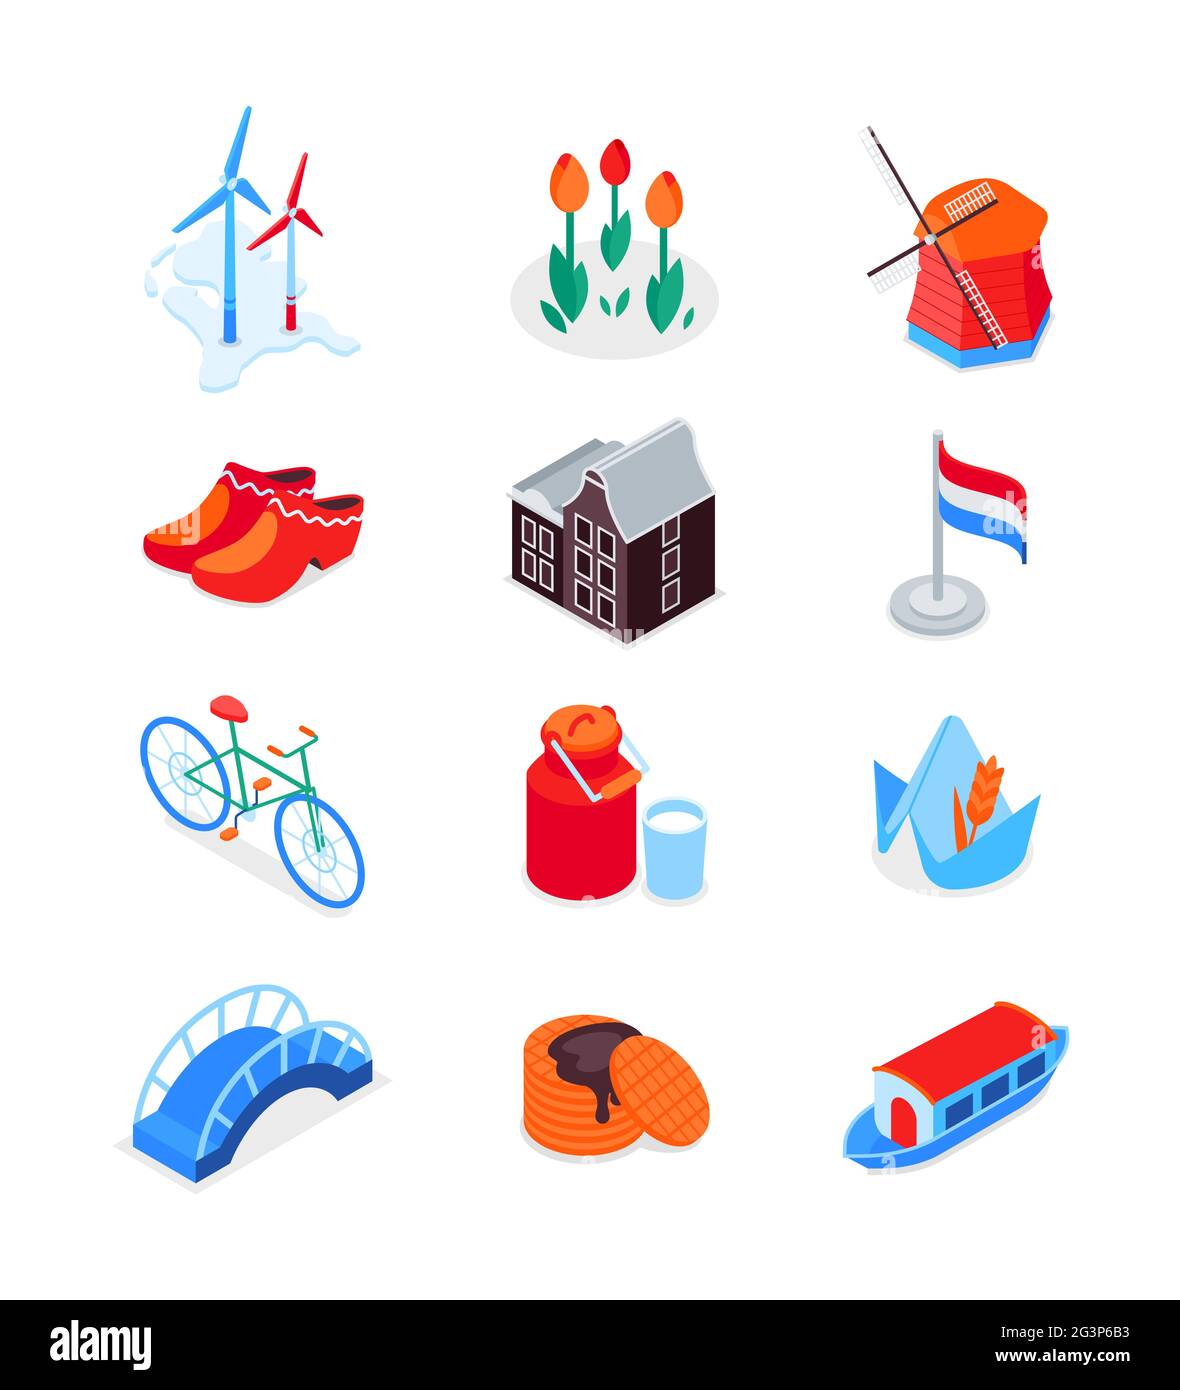 Dutch symbols - modern colorful isometric icons set. Culture and traditions of Netherlands. Windmill, agriculture, flag, clogs, flowers, bicycle, Amst Stock Vector